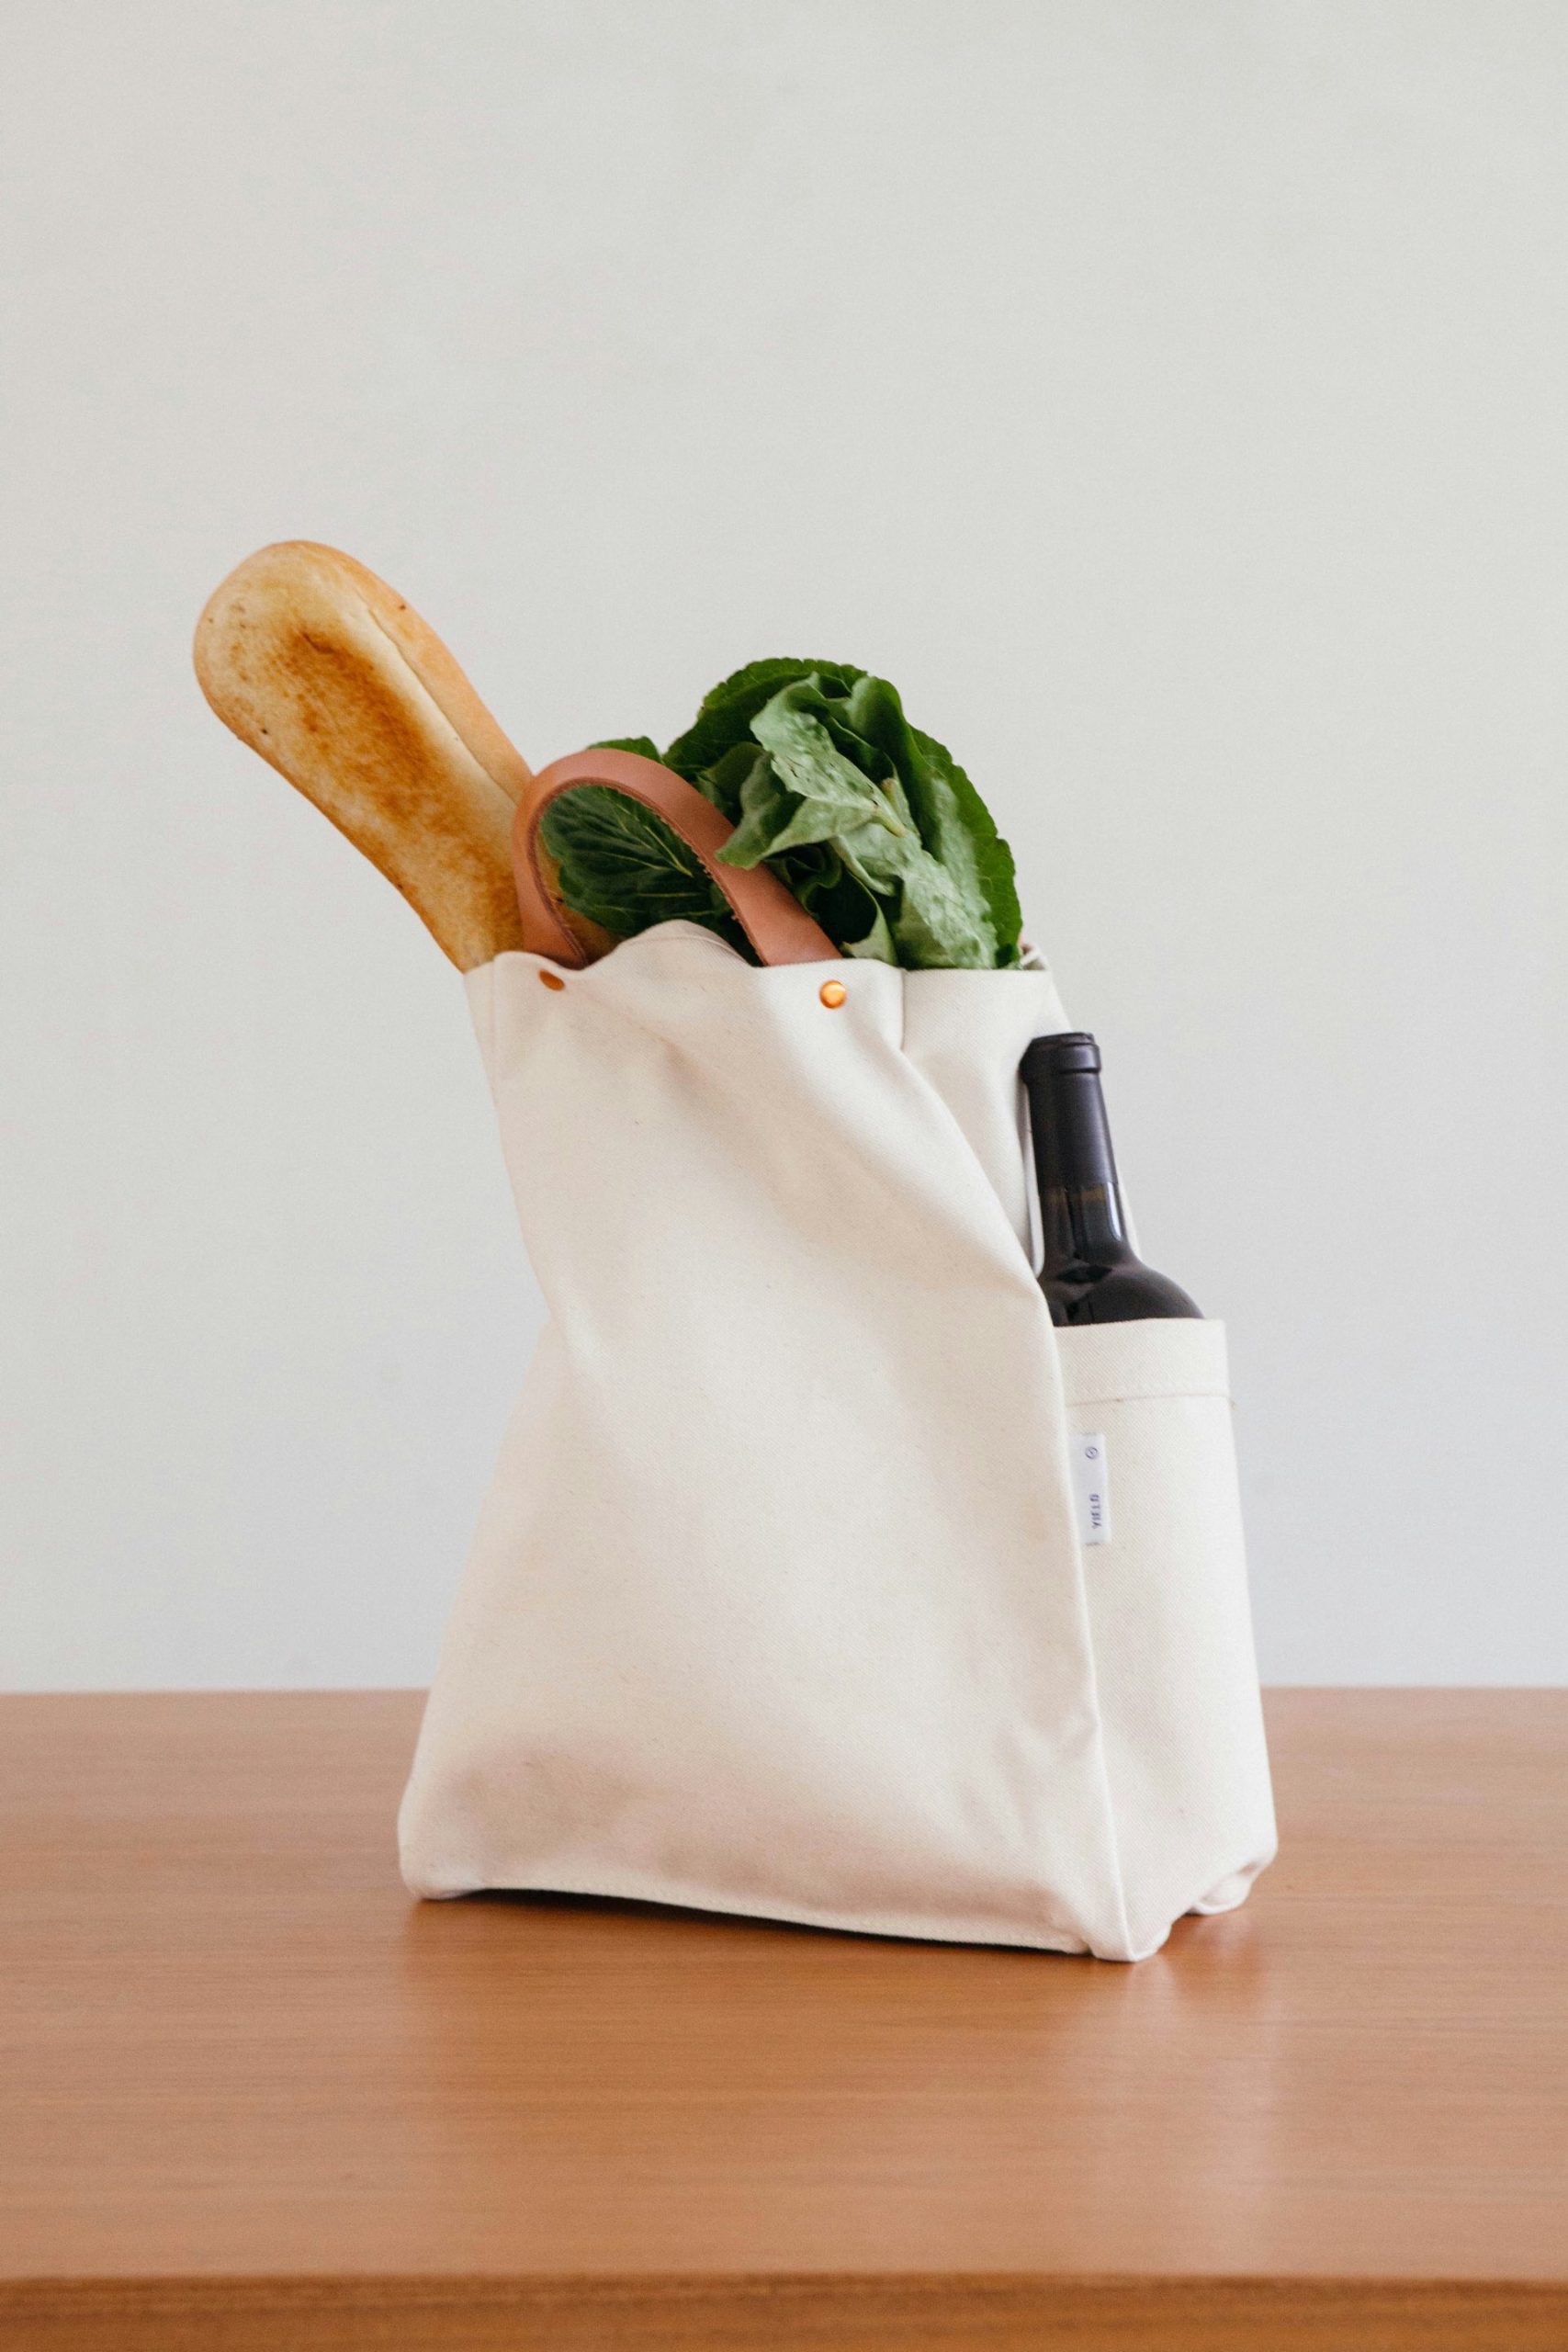 Canvas bag full of vegetables, a baguette, and wine